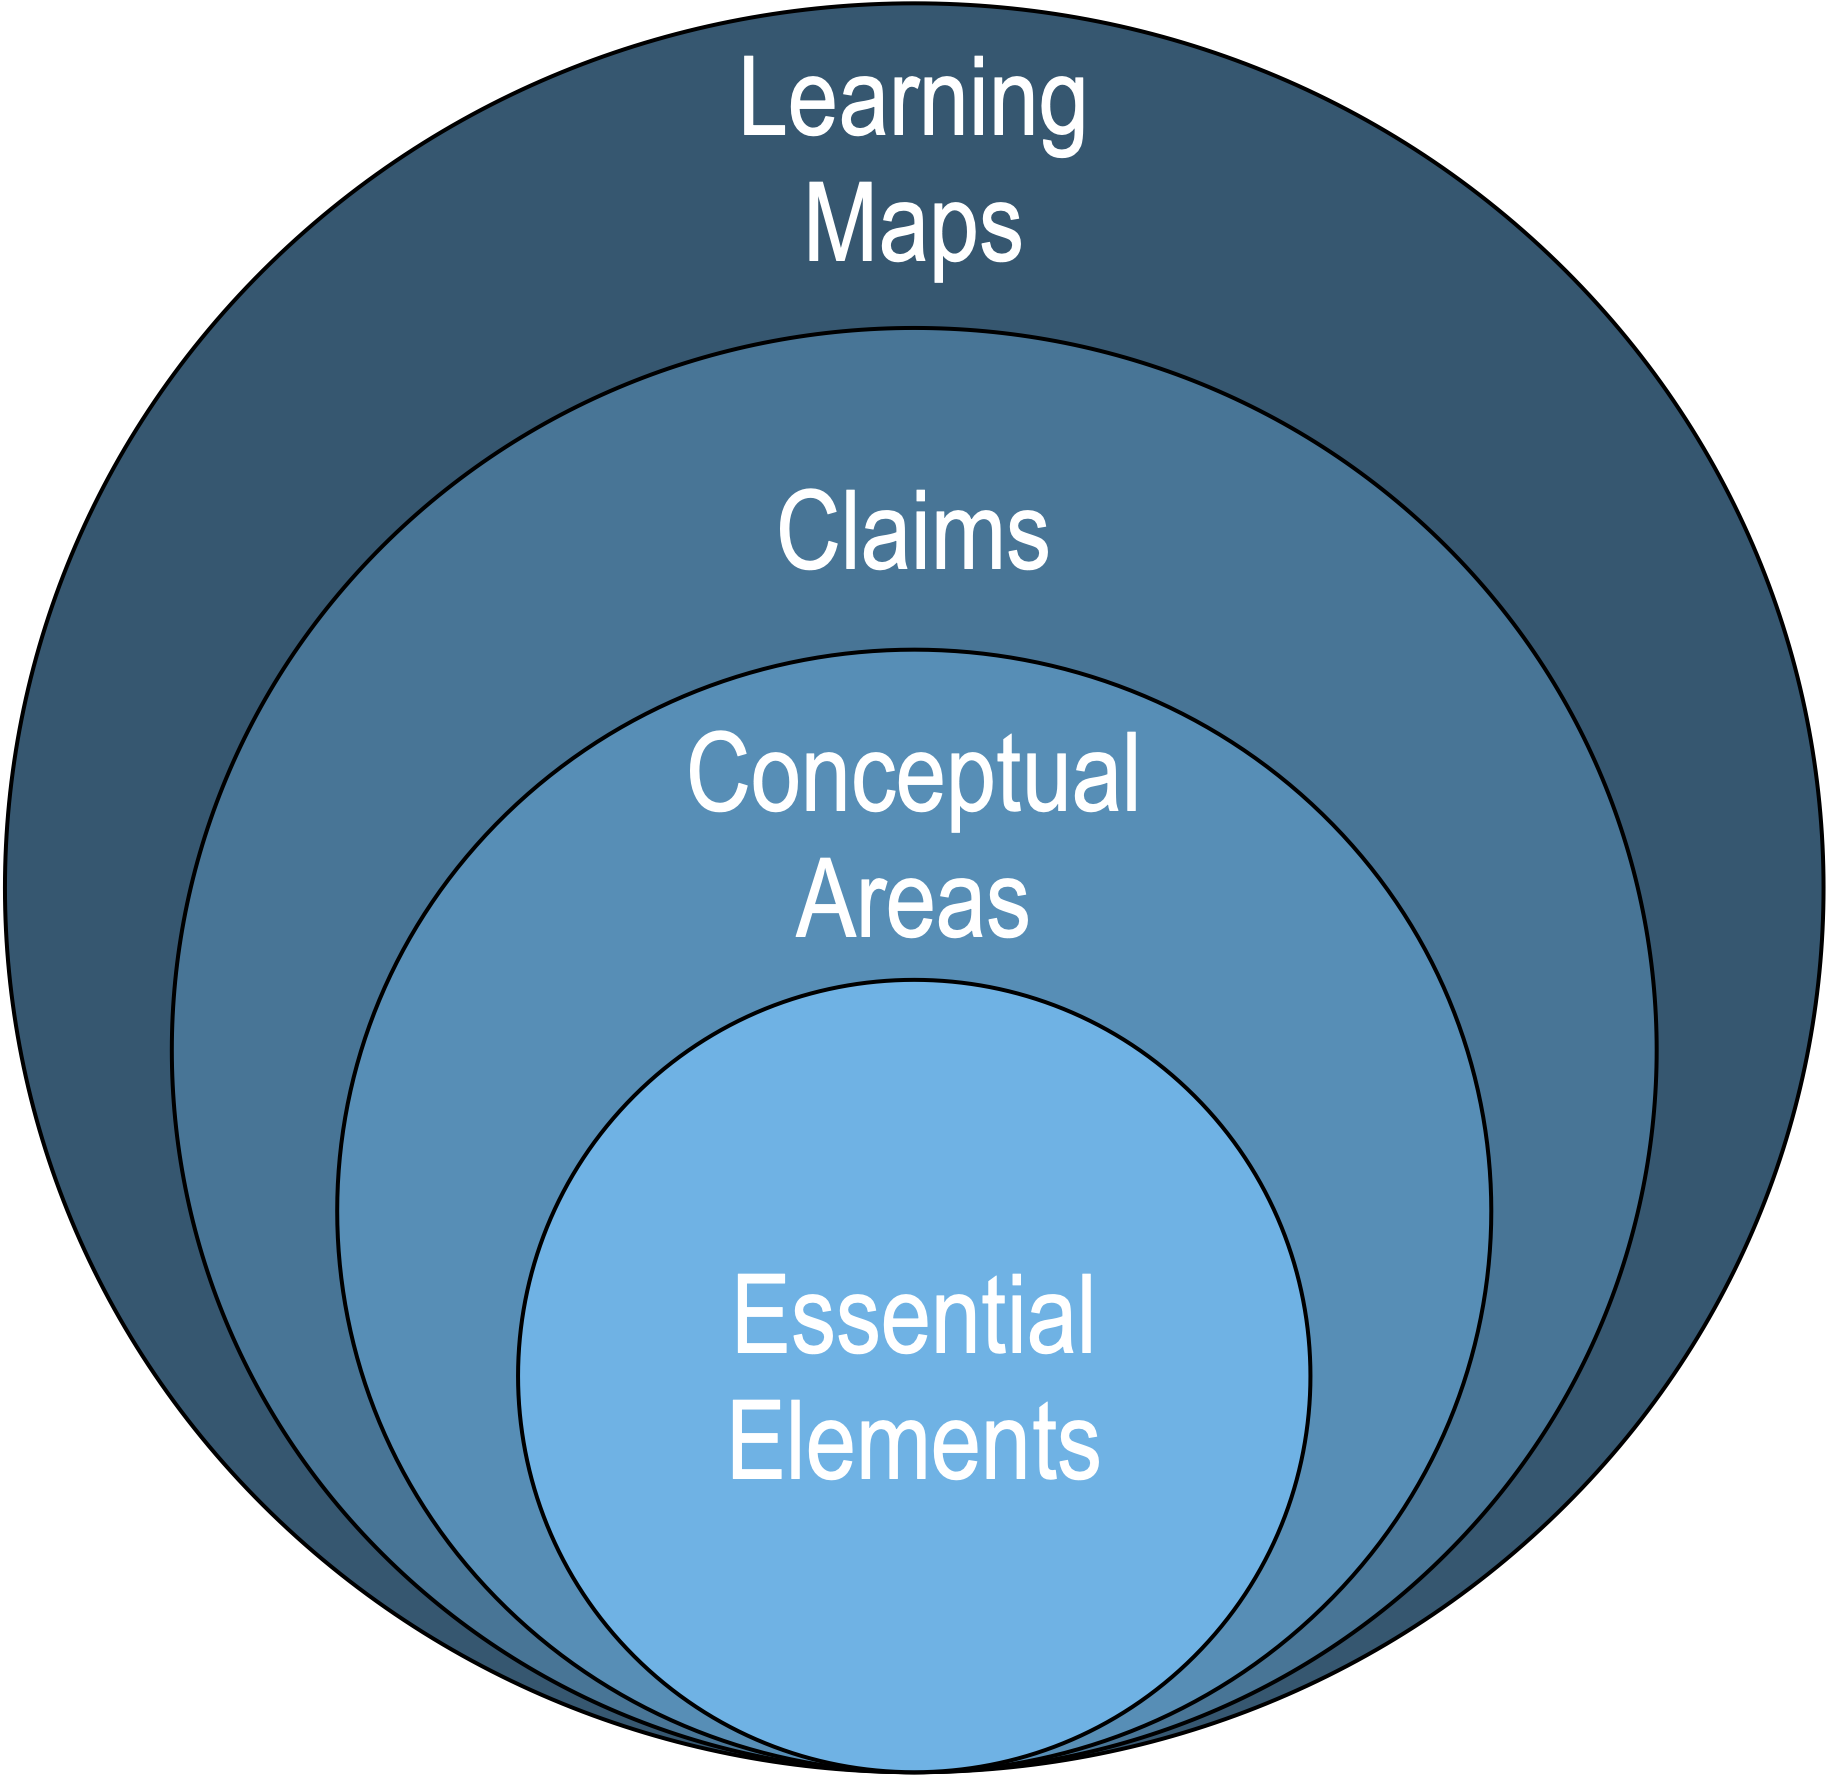 A figure showing that sections of the learning maps can be grouped into claims, which are subdivided into conceptual areas. Within each conceptual area are Essential Elements.